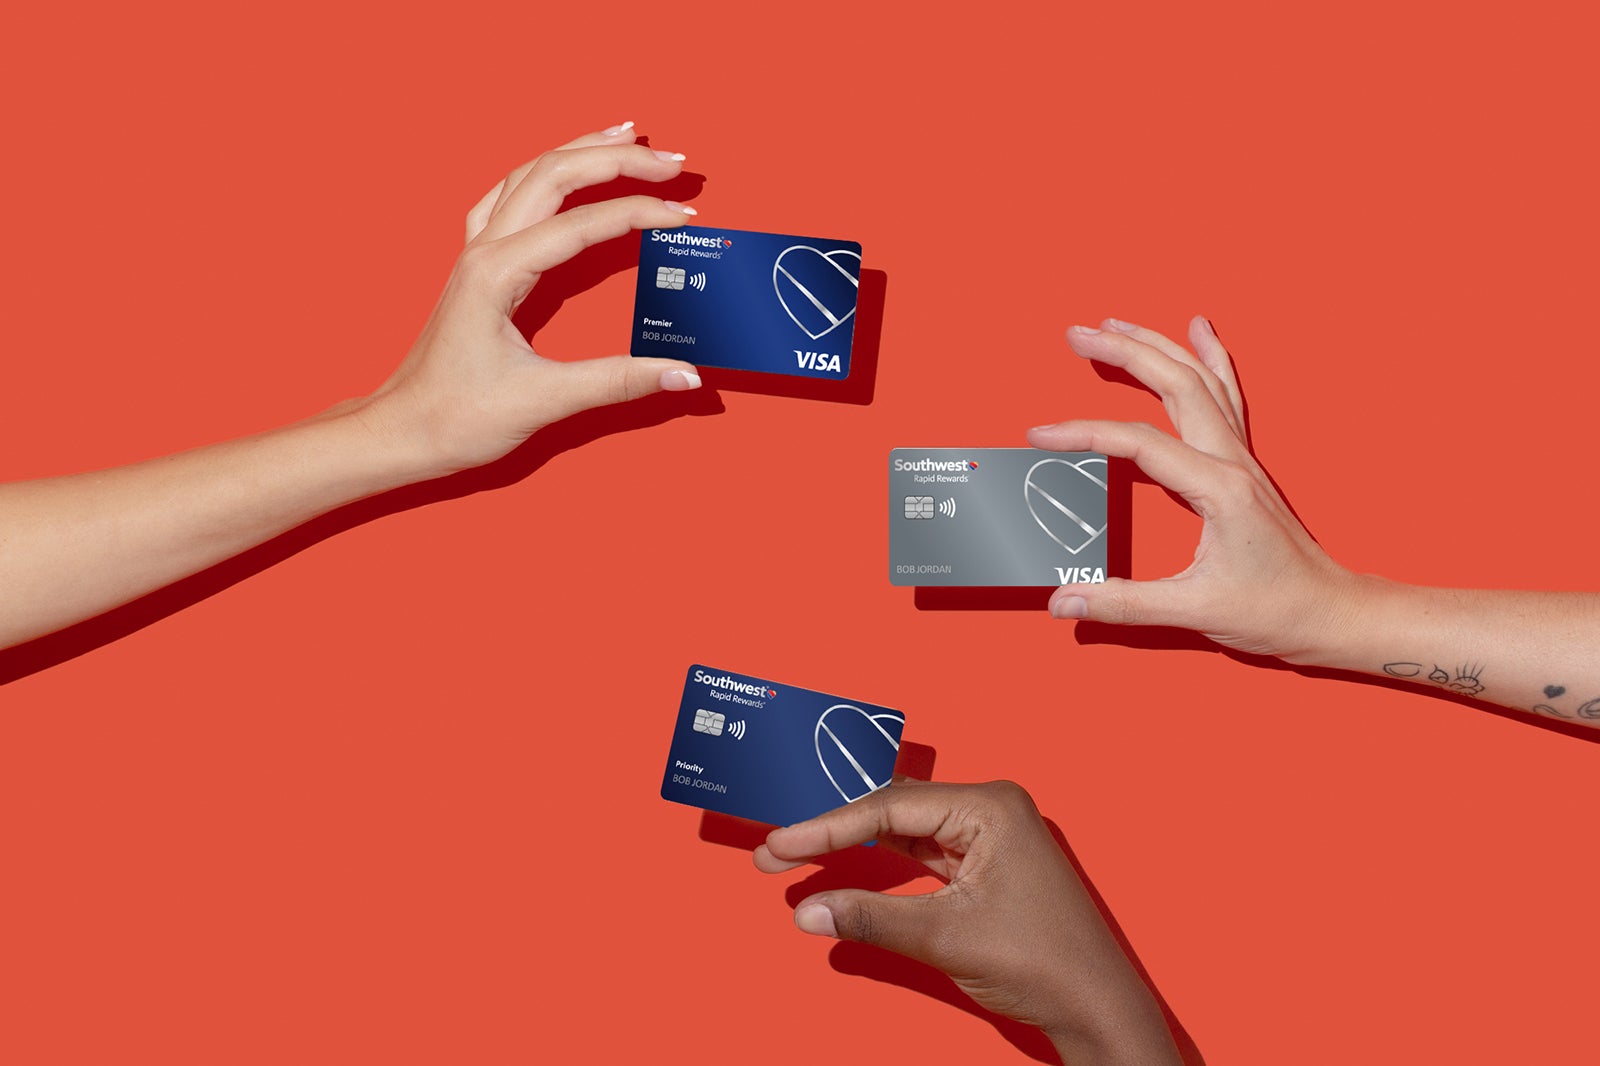 hands hold multiple Southwest Airlines credit cards